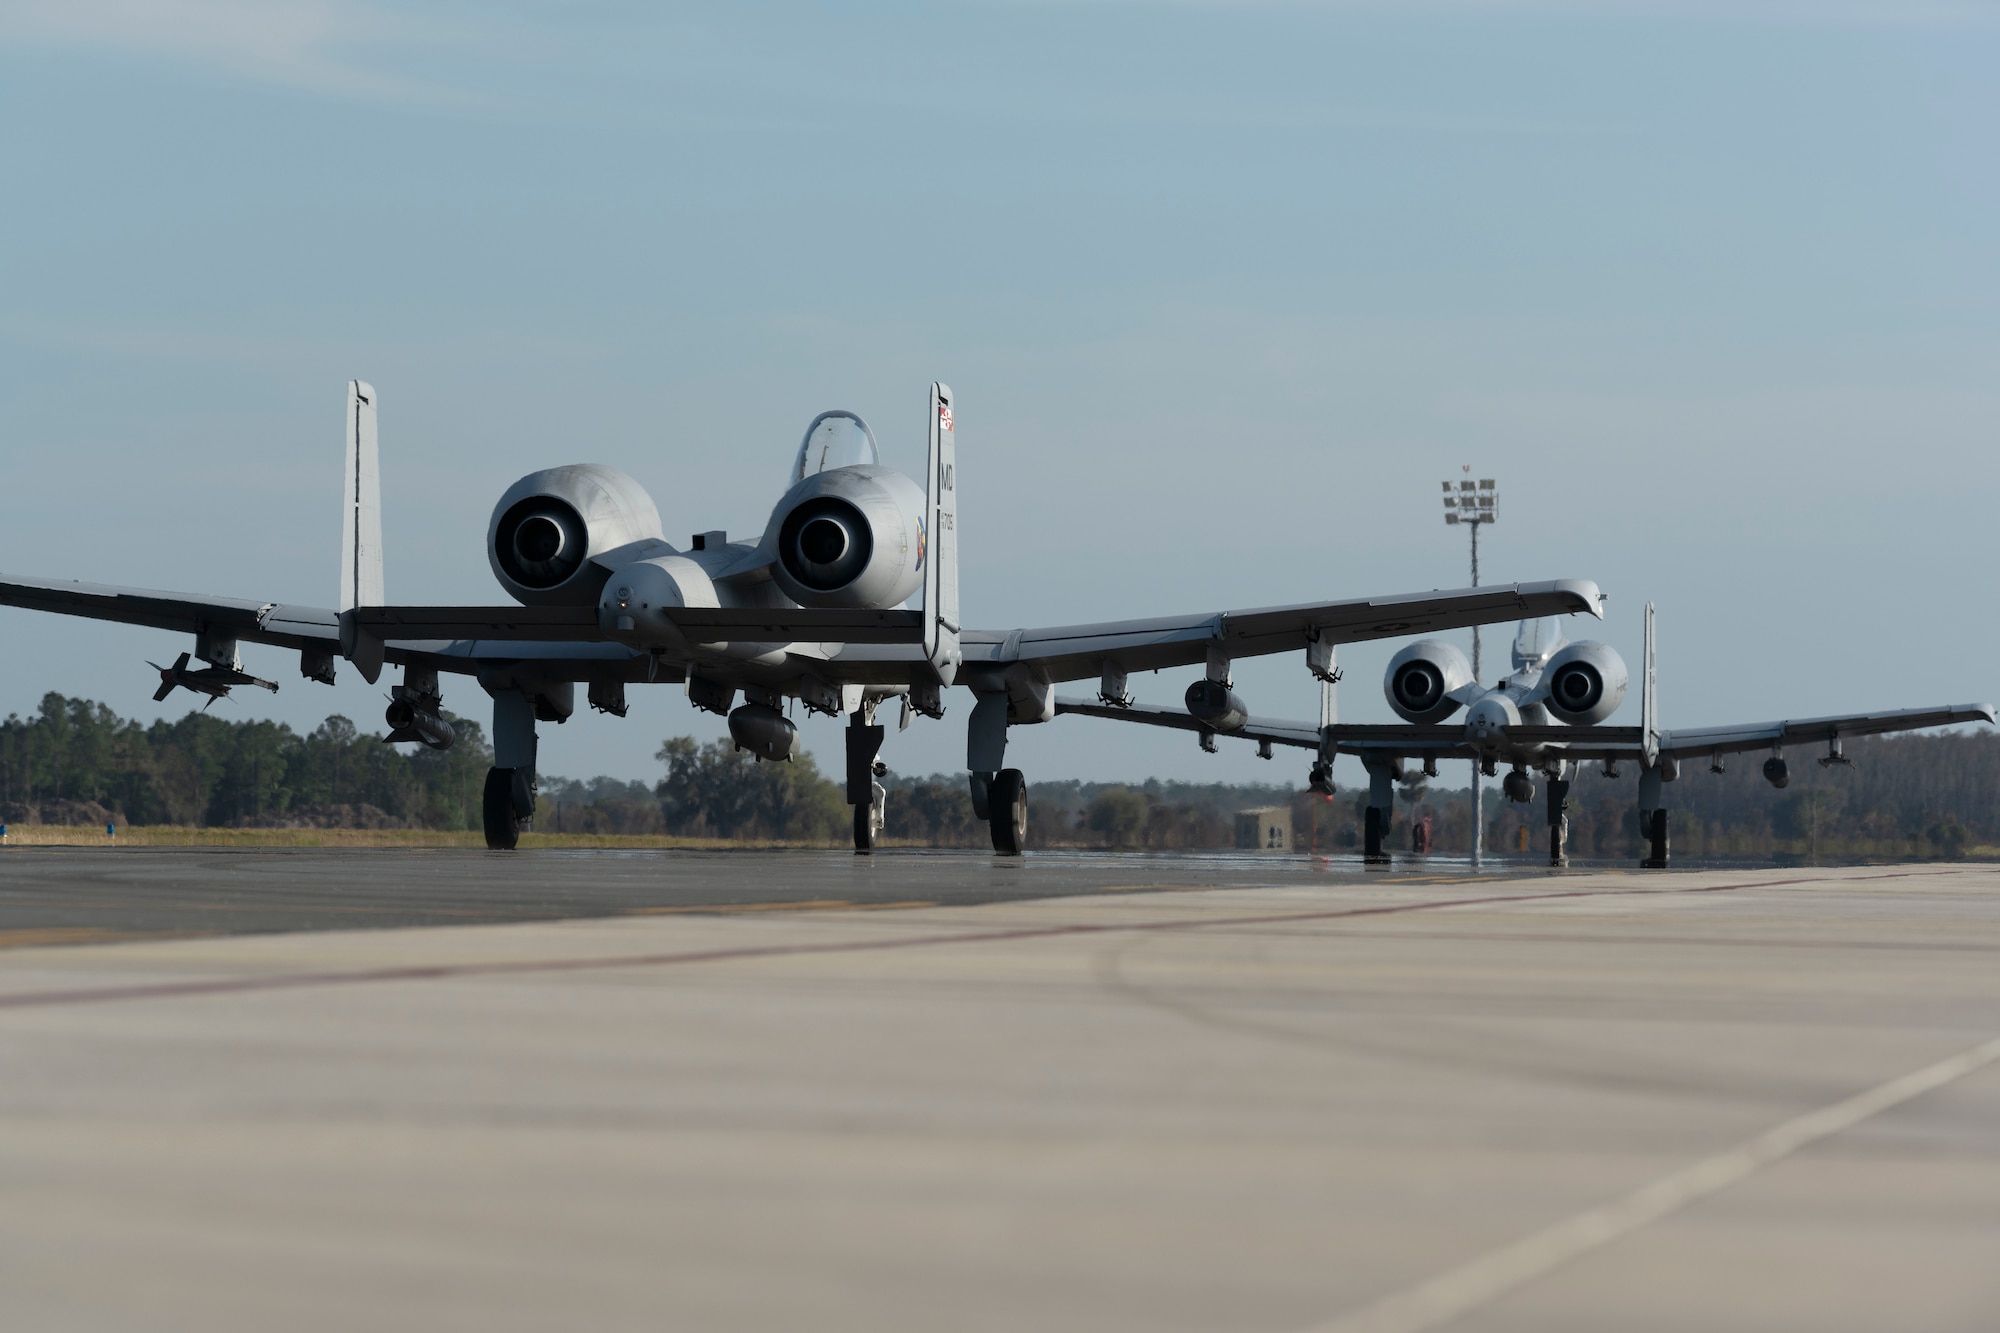 Two U.S. Air Force A-10 Thunderbolt II aircrafts, depart the airfield as part of agile combat employment during the Agile Rage exercise, Avon Park, Florida, Feb. 27, 2024. Agile Rage 2024 is a National Guard Bureau (NGB)/A3 led military exercise, hosted at the Air Dominance Center, taking place from February 26 to March 8, 2024 that involves the collaborative efforts of various Air National Guard Wings conducting joint counter-land and combat search and rescue (CSAR) operations in a simulated medium to high threat environment. (U.S. Air National Guard photo by Master Sgt. Rafael D. Rosa)